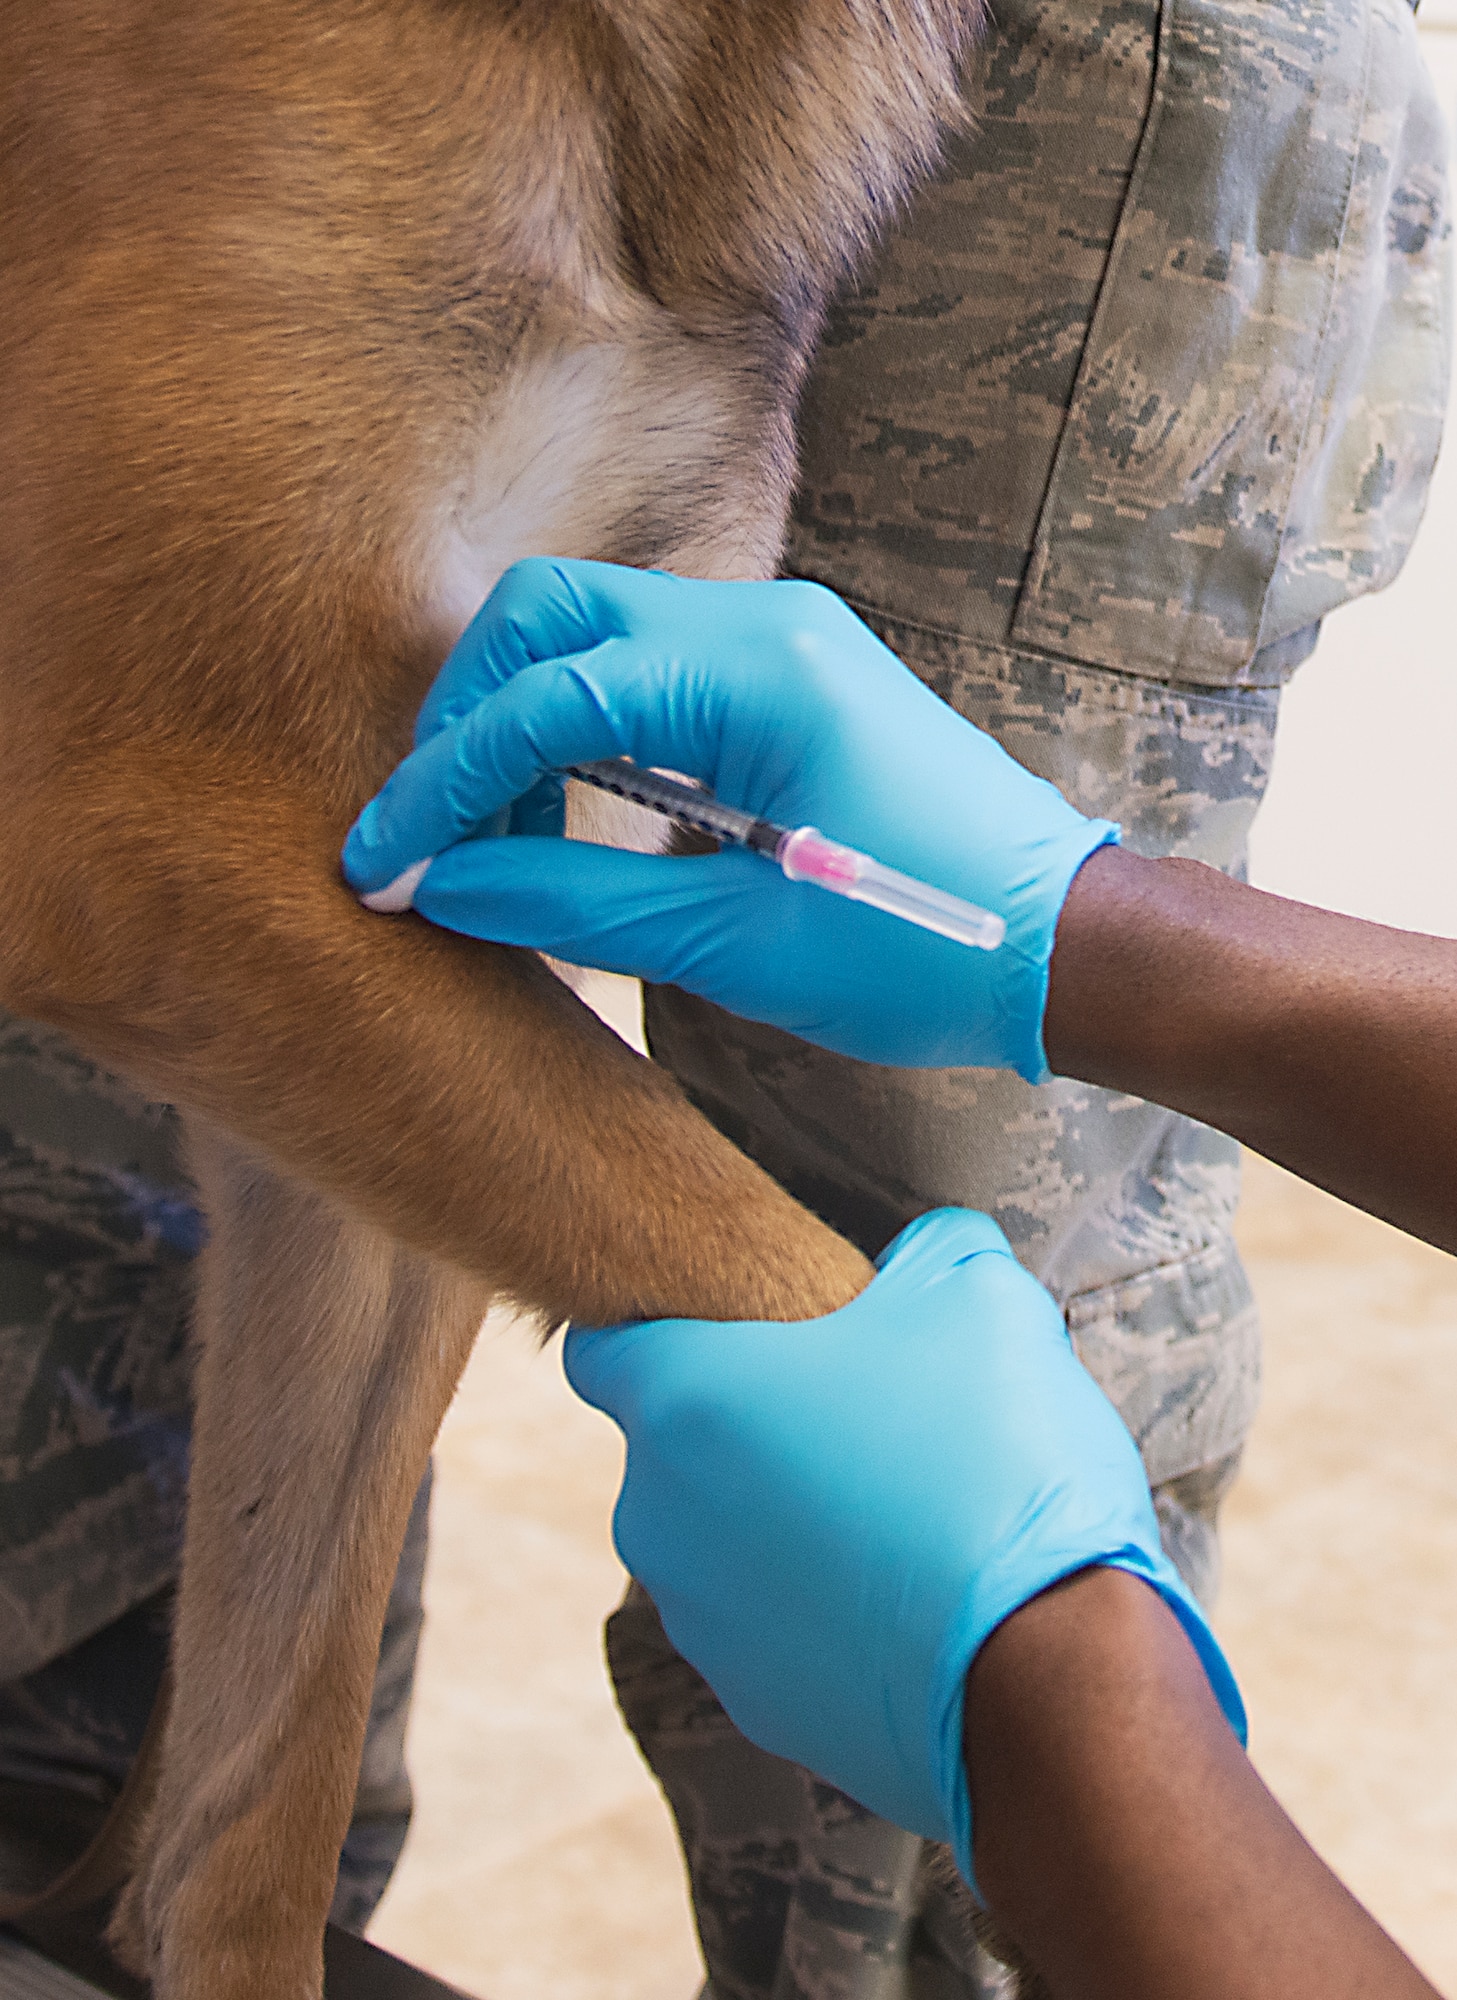 U.S. Army Spc. Traveon Holman, 23d Aerospace Medicine Squadron acting NCO in charge of veterinary clinic, takes a blood sample from Military Working Dog Diyi, 822nd Base Defense Squadron, at Moody Air Force Base, Ga., March 14, 2014. Diyi is the second MWD to be diagnosed with canine post traumatic stress disorder in the past four years here. (U.S. Air Force photo by Senior Airman Tiffany M. Grigg/Released) 